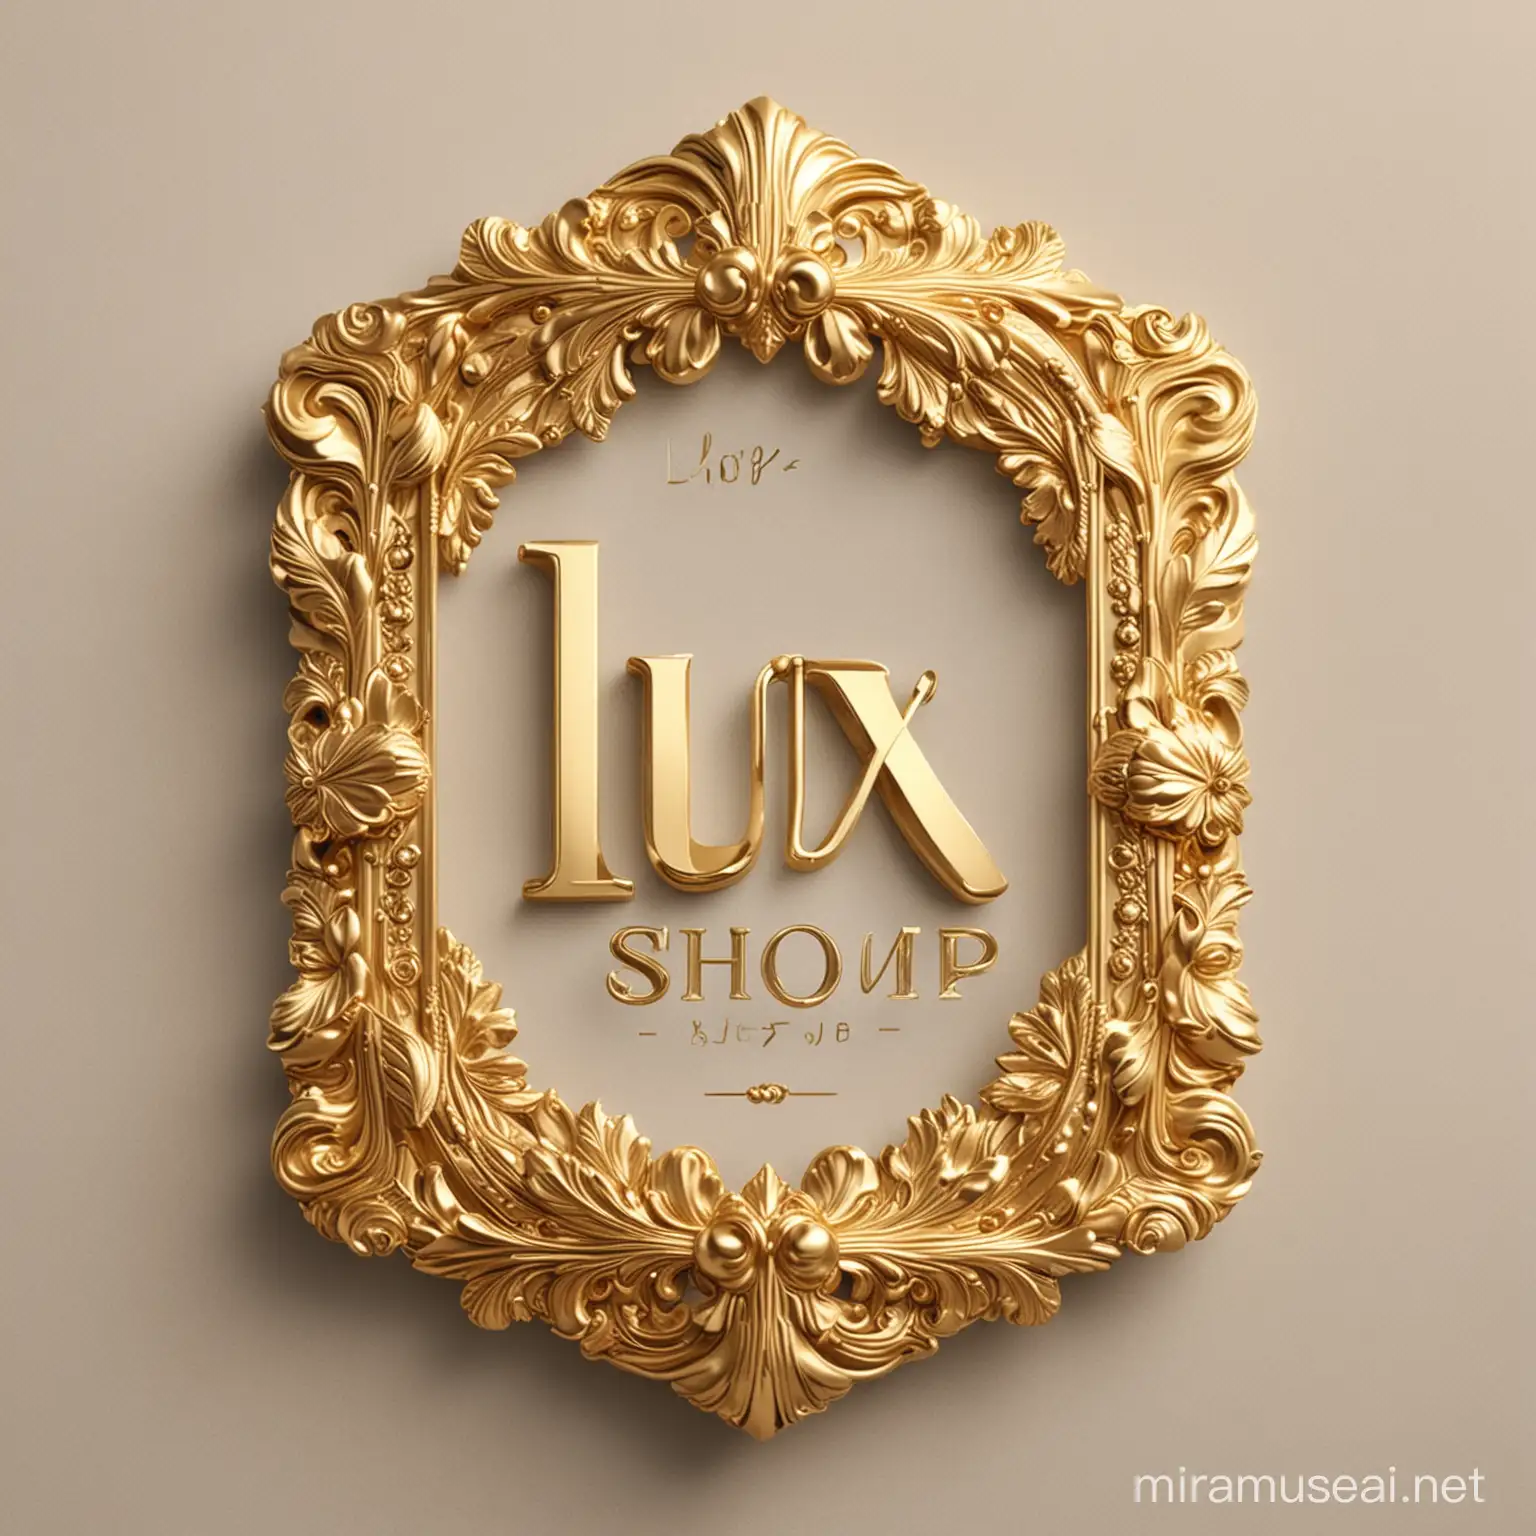 This design features the elegant and luxurious feel of gold, which aligns with the name "LUX shop" and the concept of selling clothes.